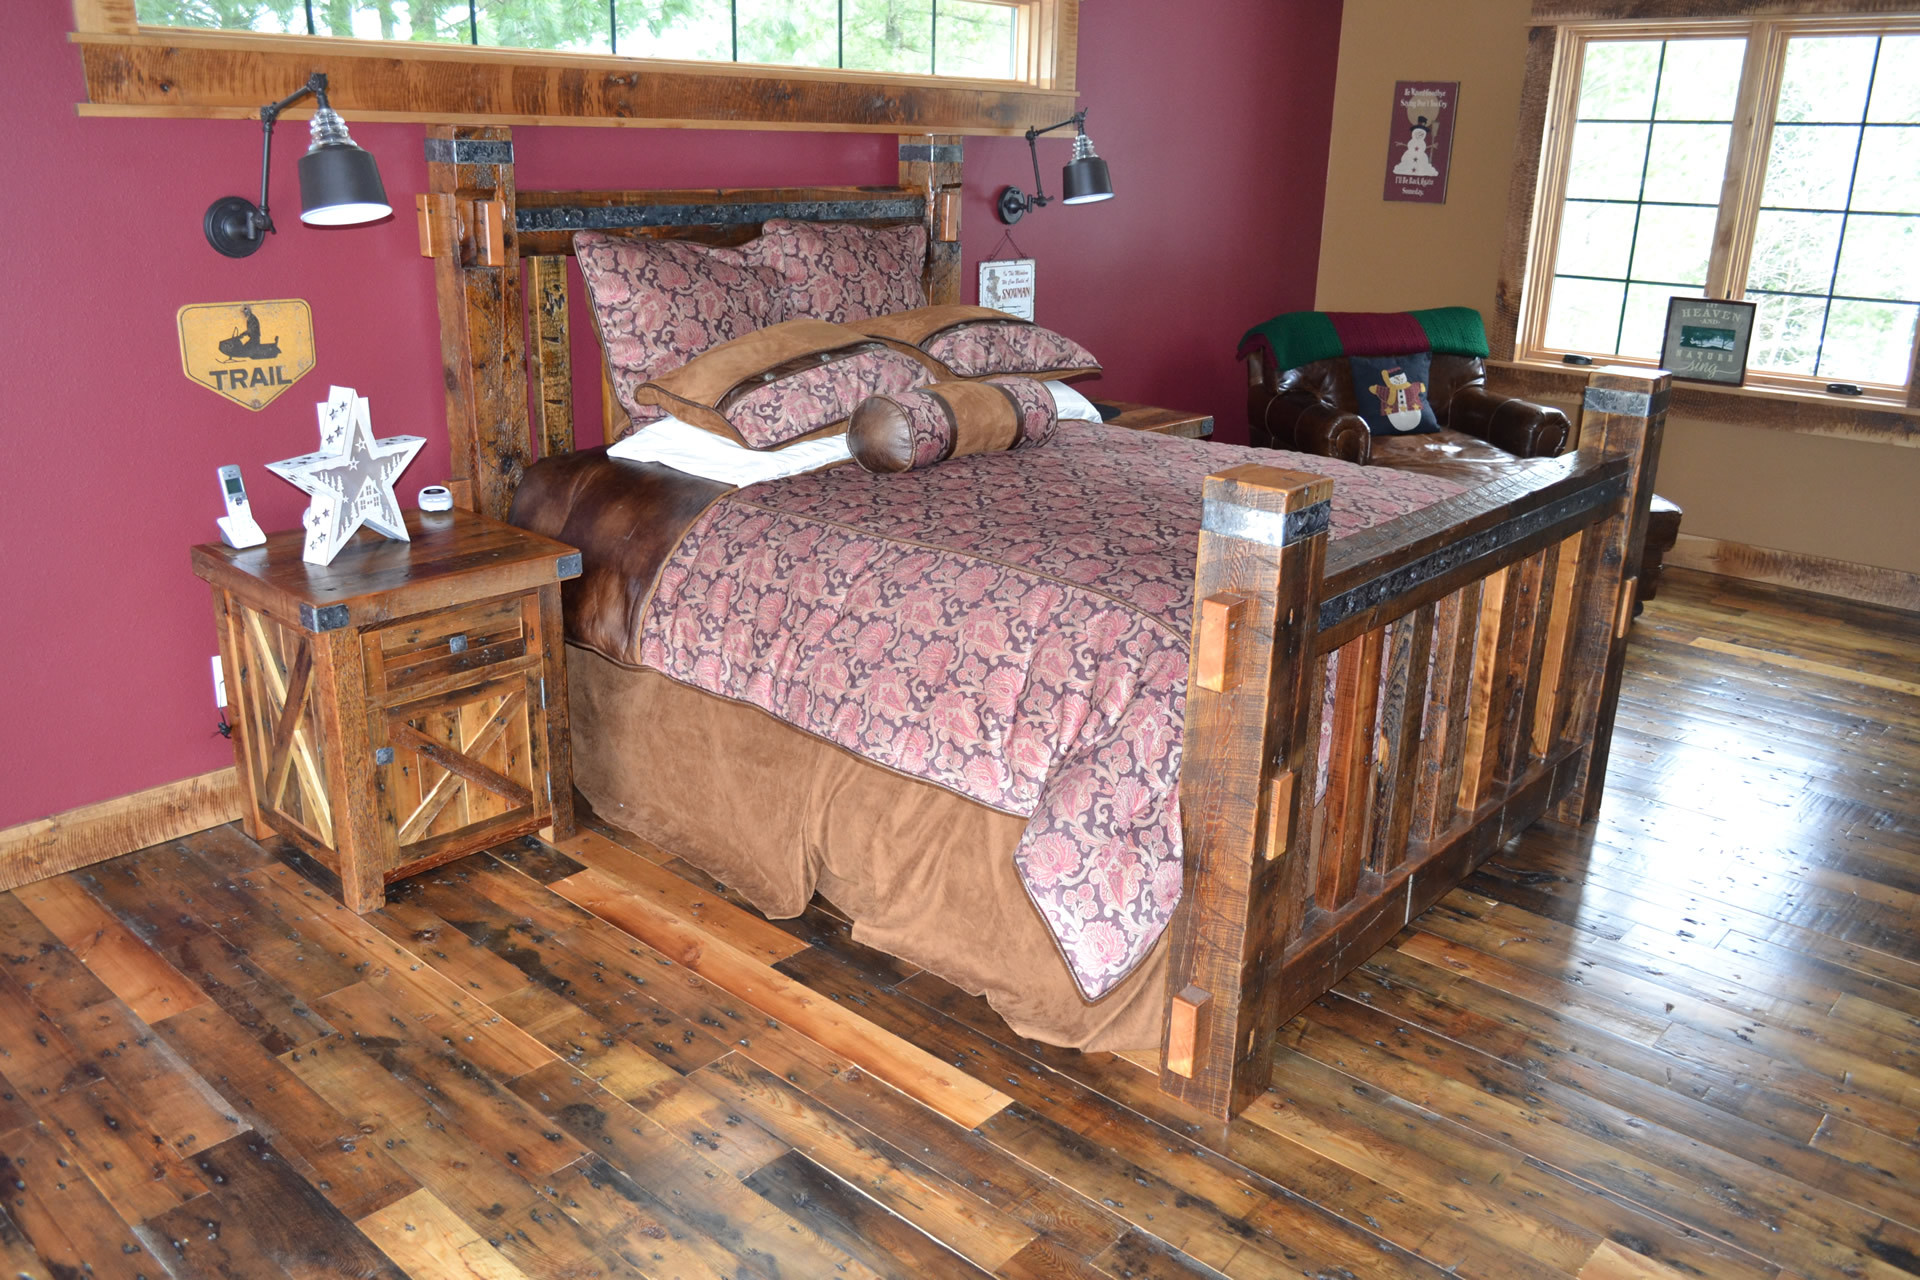 11 Ideal Appalachian Red Oak Hardwood Flooring 2024 free download appalachian red oak hardwood flooring of bpm select the premier building product search engine paneling with regard to show 2 additional results save share